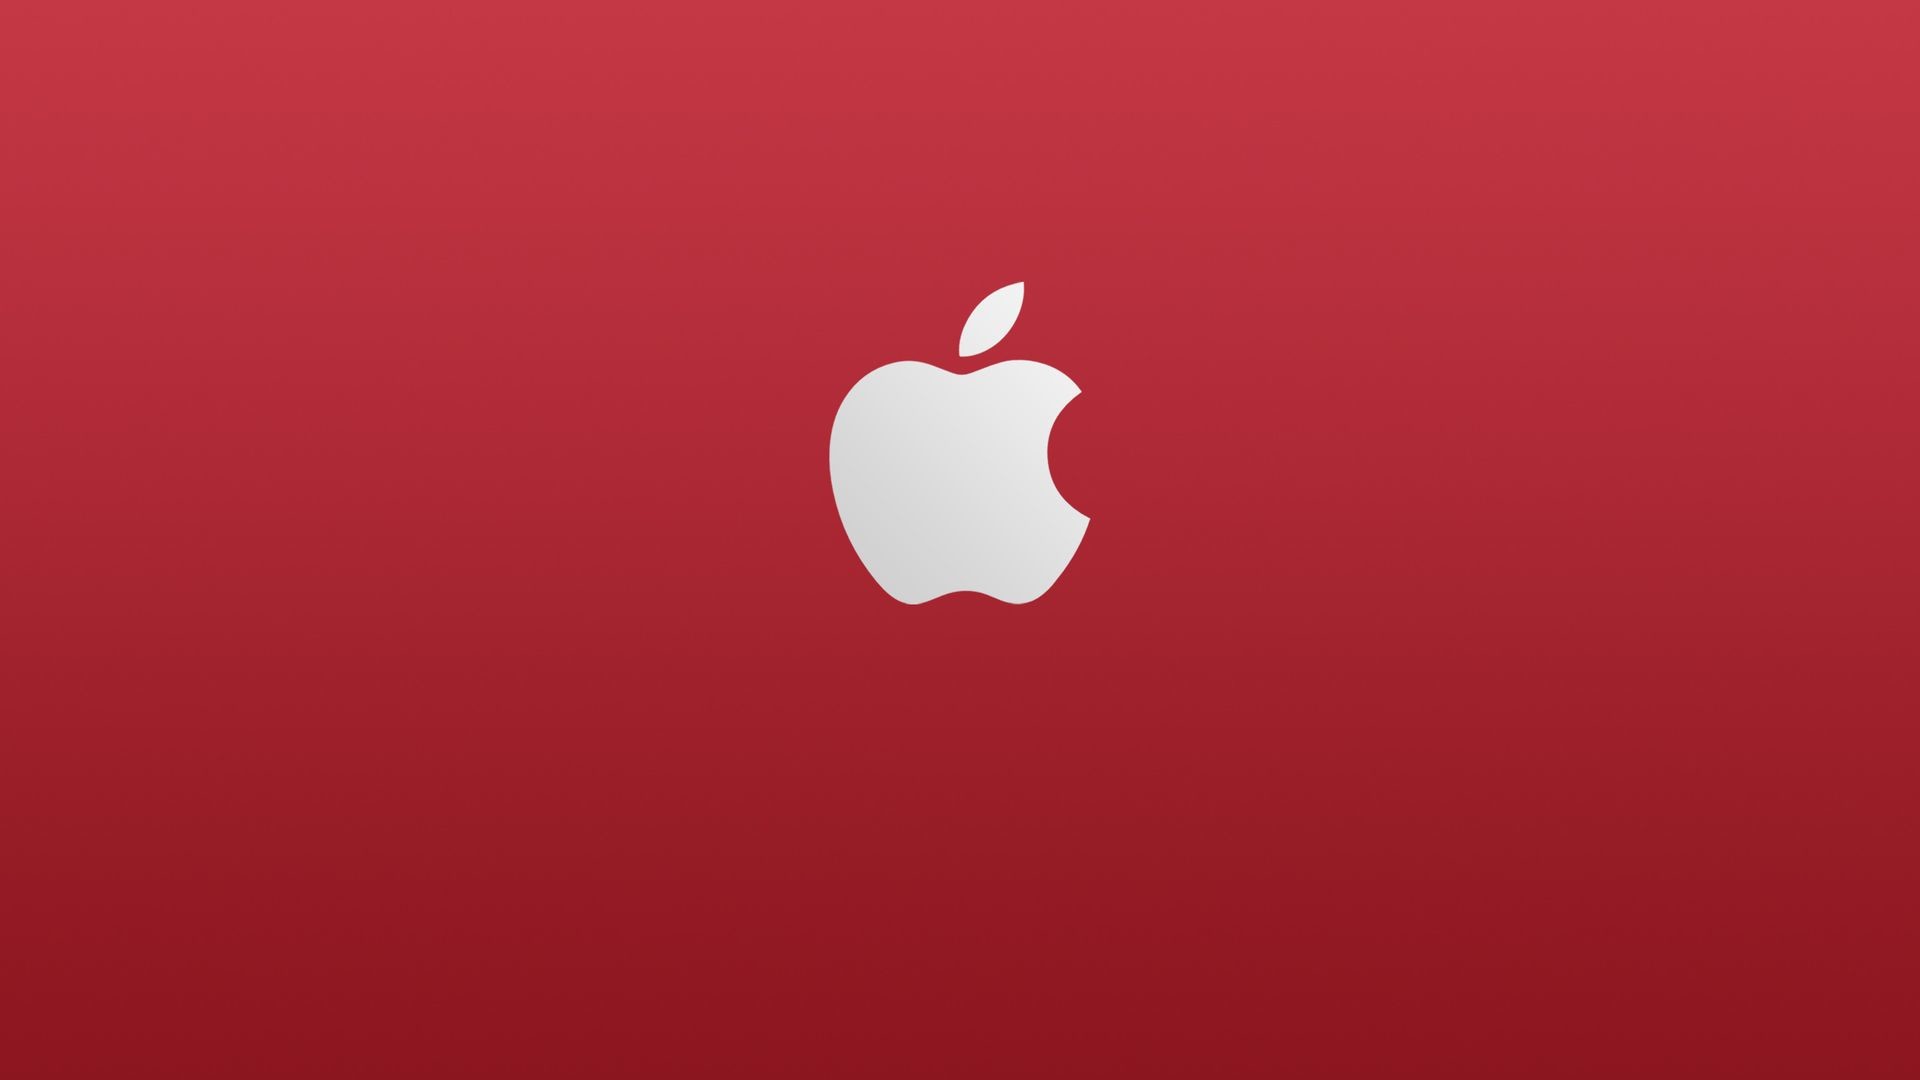 1920x1080 Red Background and White Apple Logo HD Wallpaper